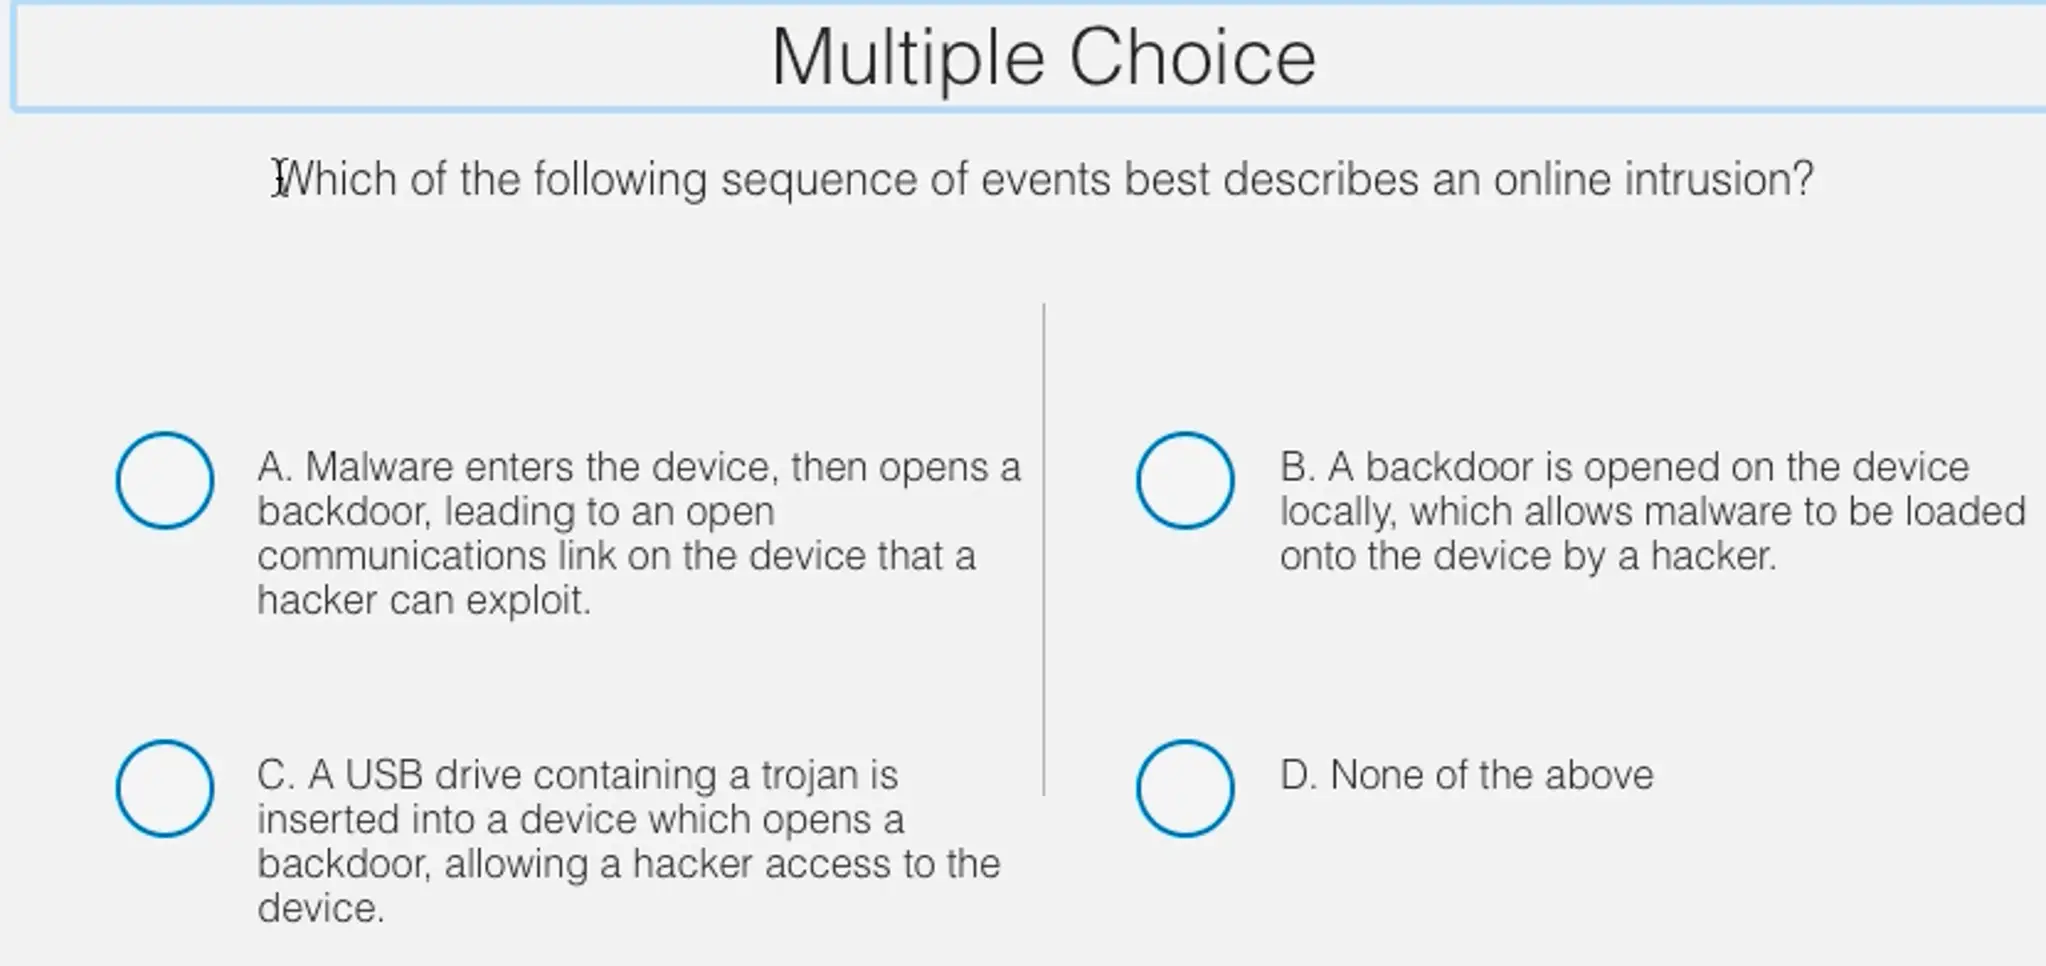 Which of the following sequence of events best describes an online intrusion? Malware enters the device, then opens a backdoor, leading to an open communications link on the device that a hacker can exploit. A backdoor is opened on the device locally, which allows malware to be loaded onto the device by a hacker. A USB drive containing a trojan is inserted into a device which opens a backdoor, allowing a hacker access to the device. None of the above